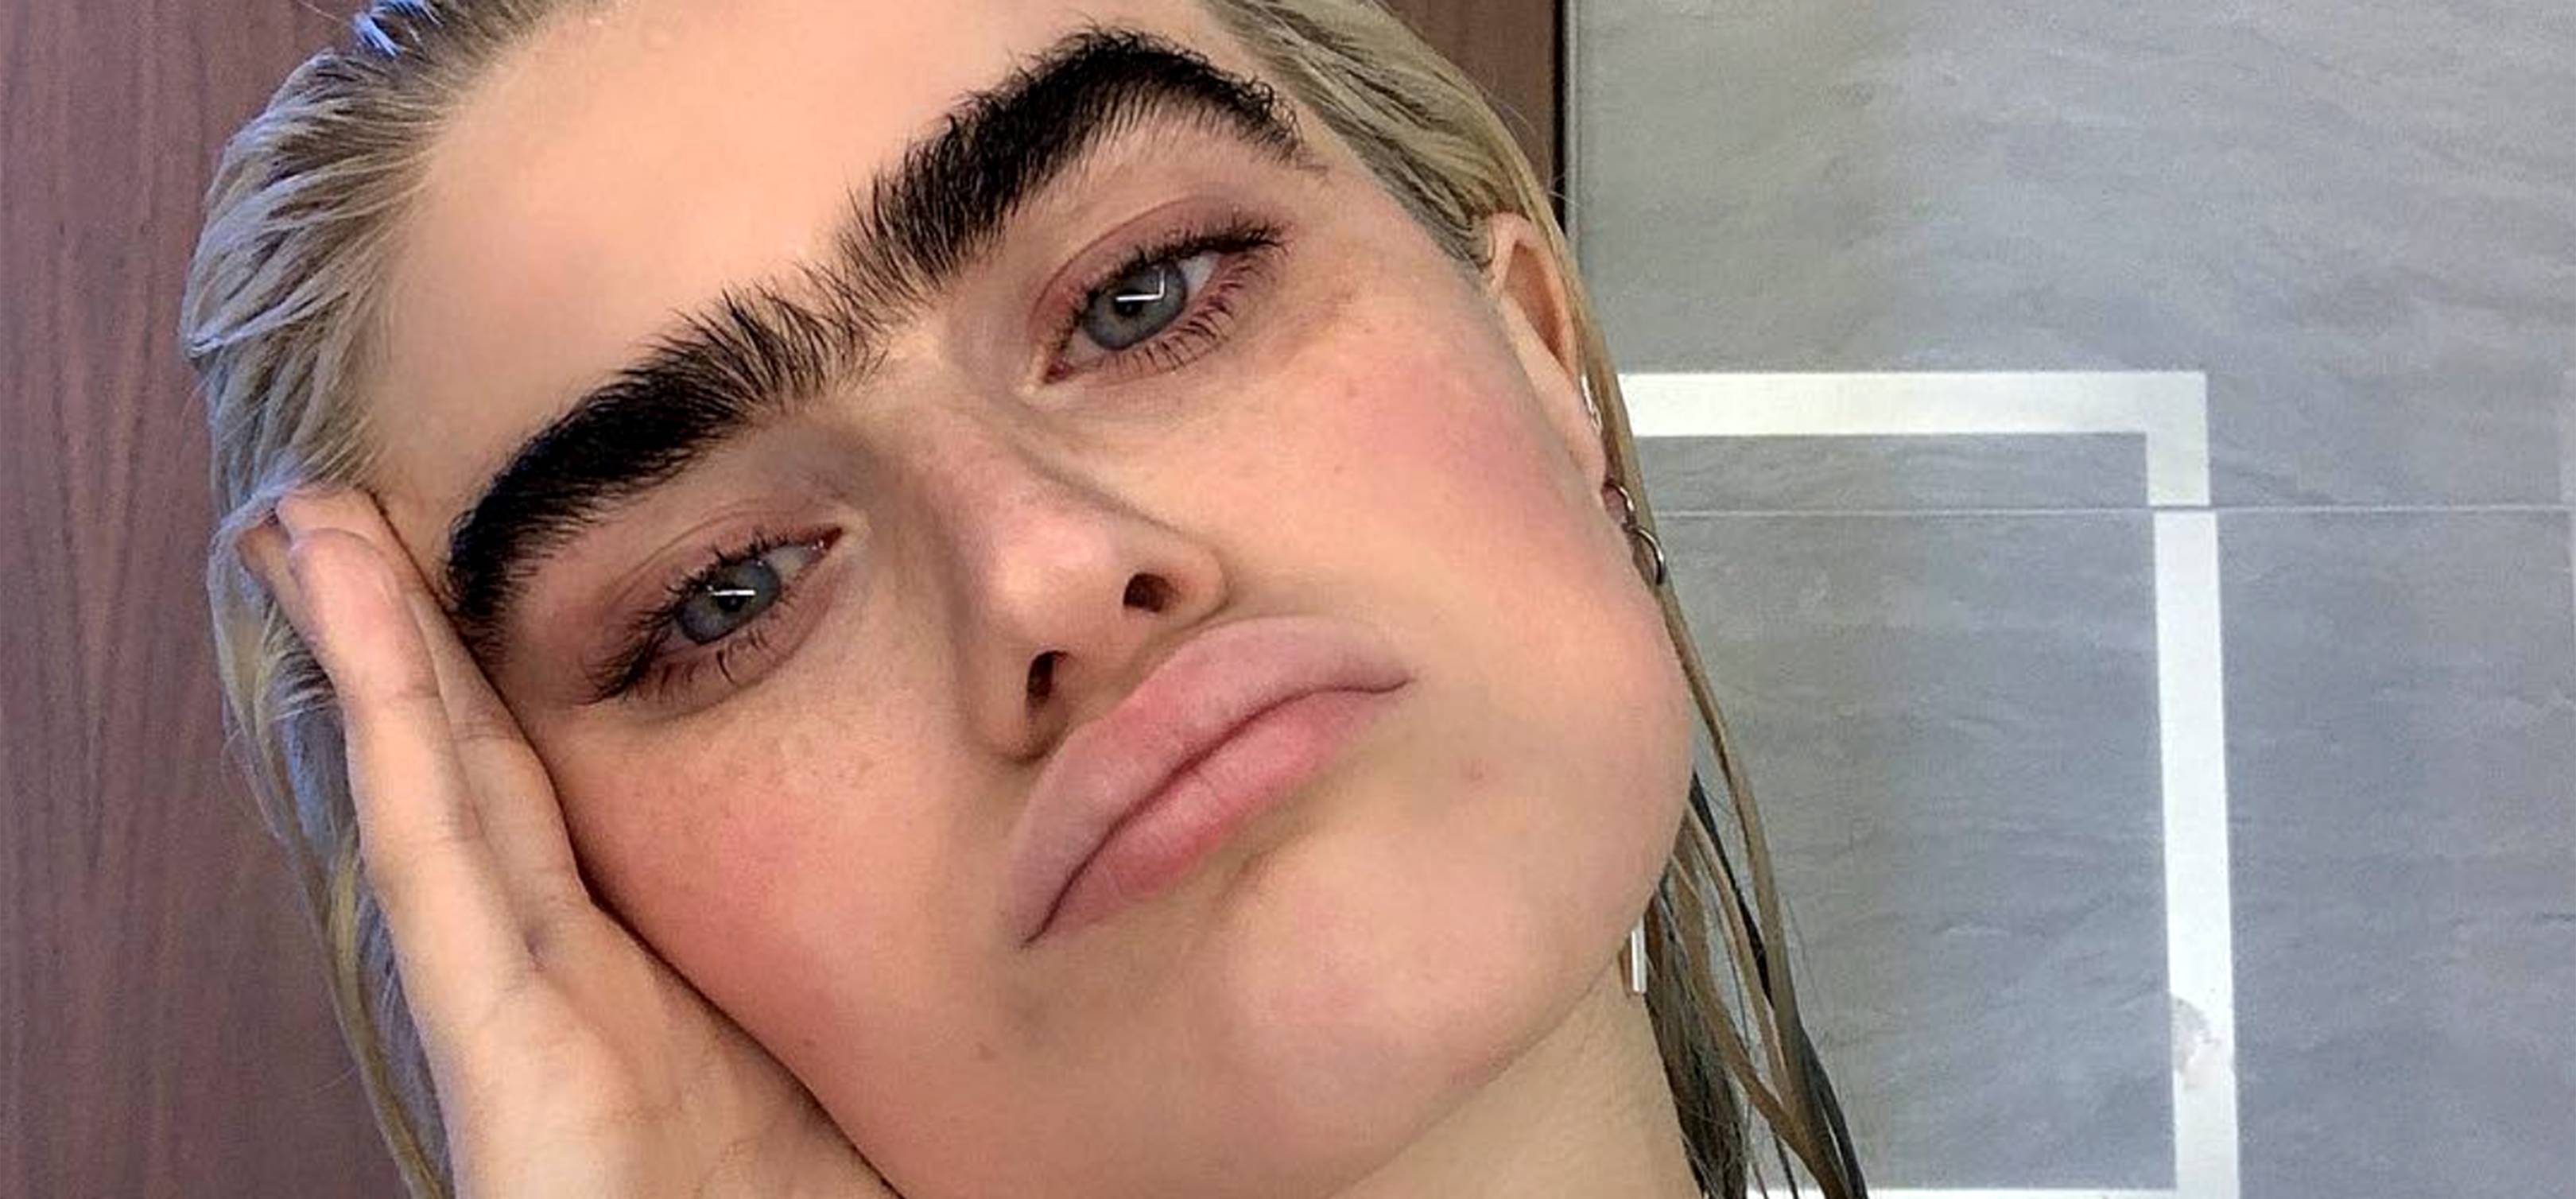 sophia hadjipanteli is the unibrowed model changing the beauty conversation online glamour uk - model shows off her unibrow on instagram daily mail online